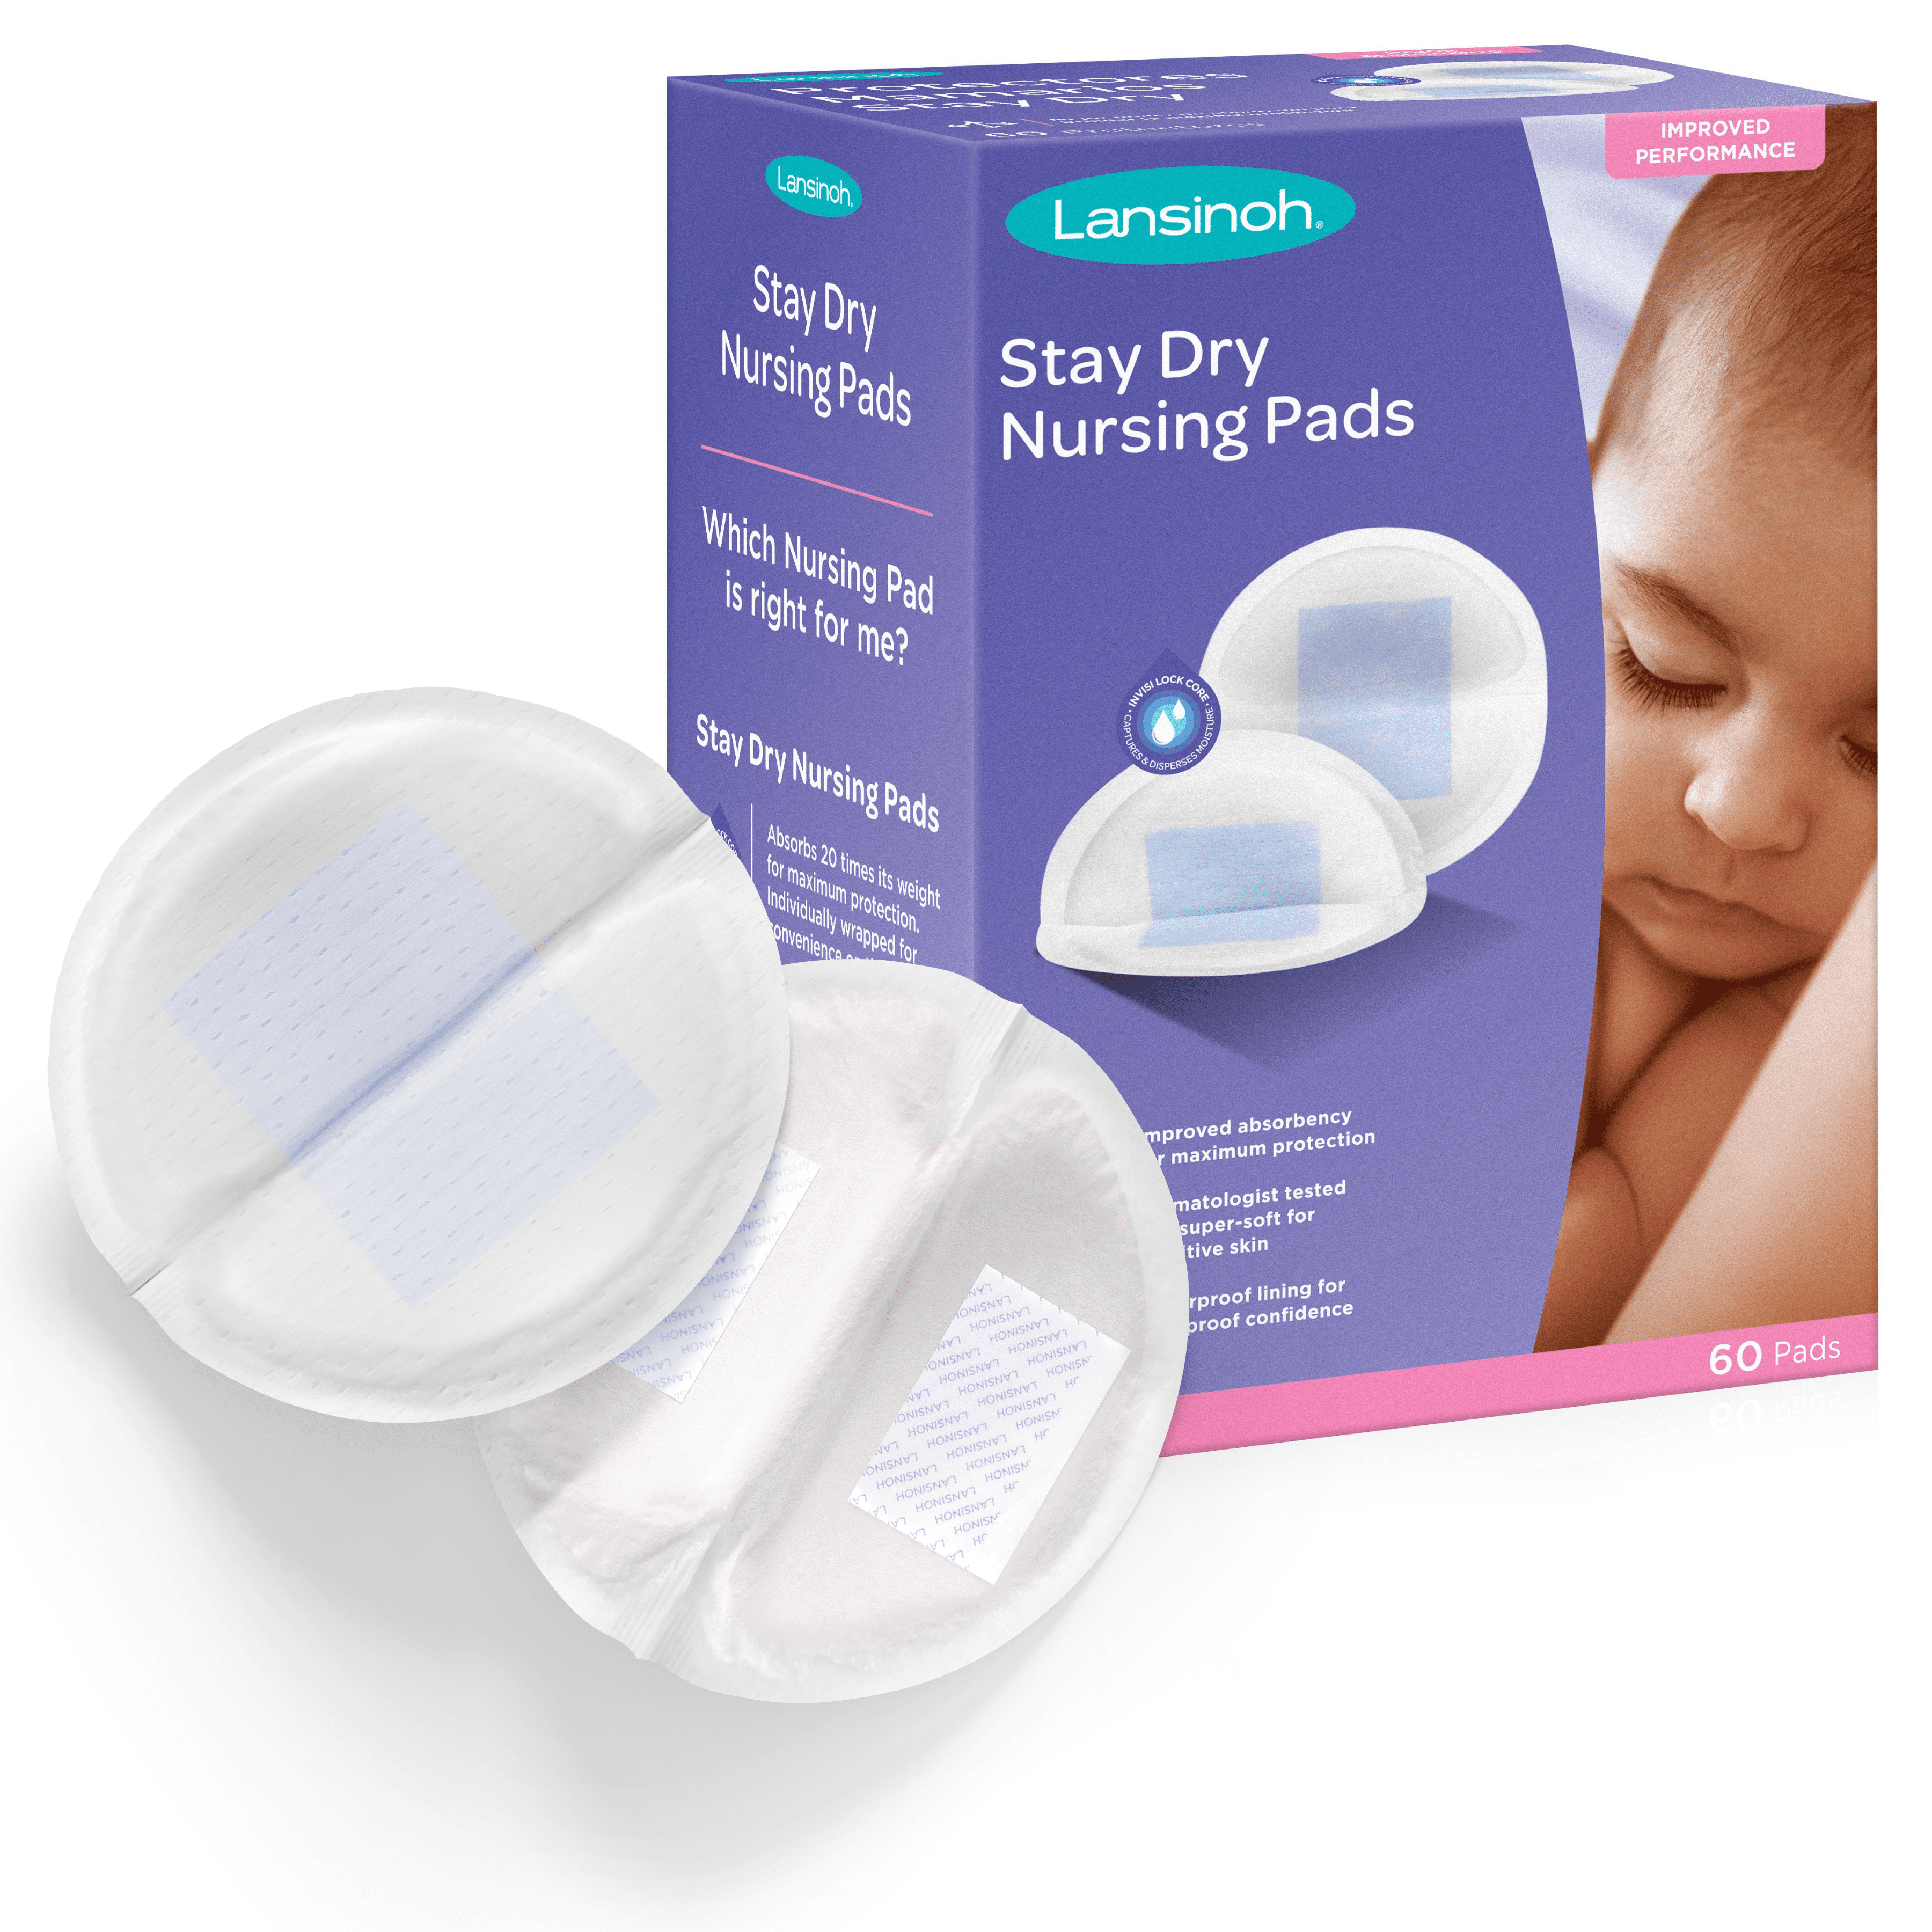 Lansinoh Pack of 60 Disposable Nursing Breast Pads Individually Wrapped